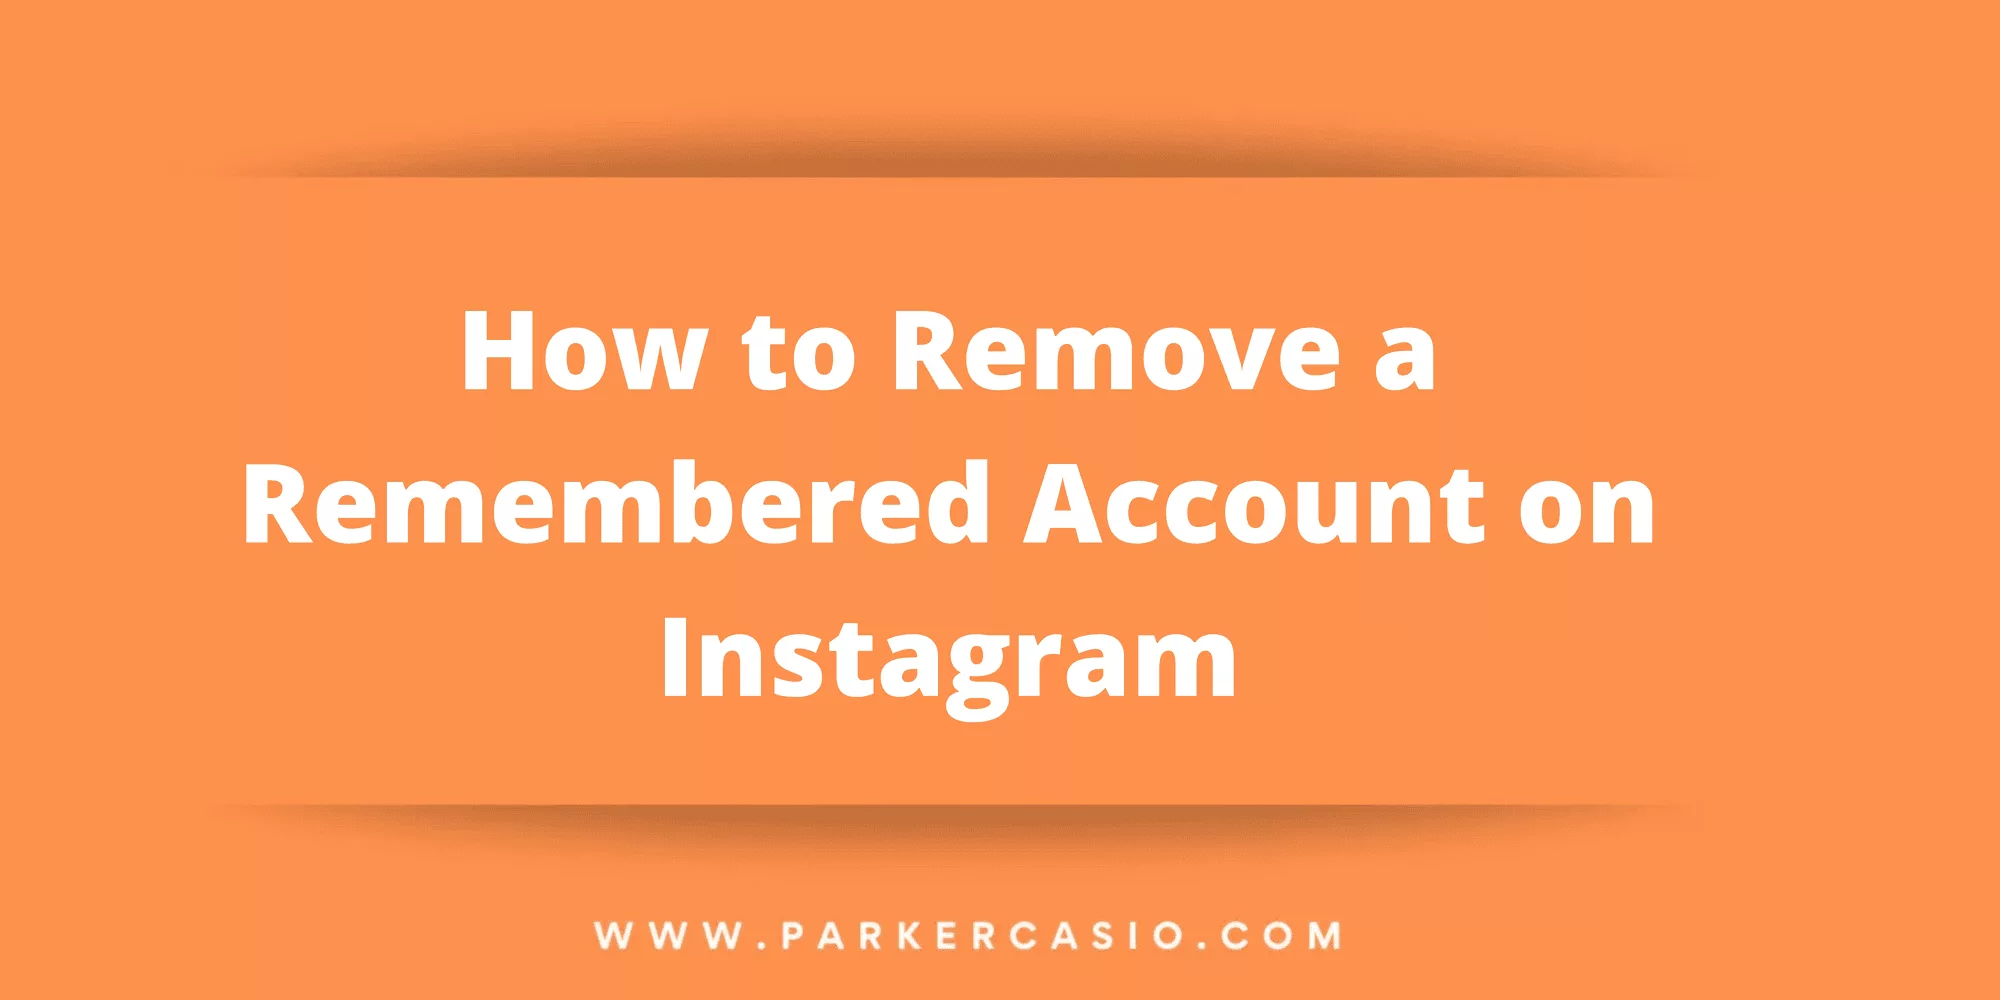 How to Remove a Remembered Account on Instagram